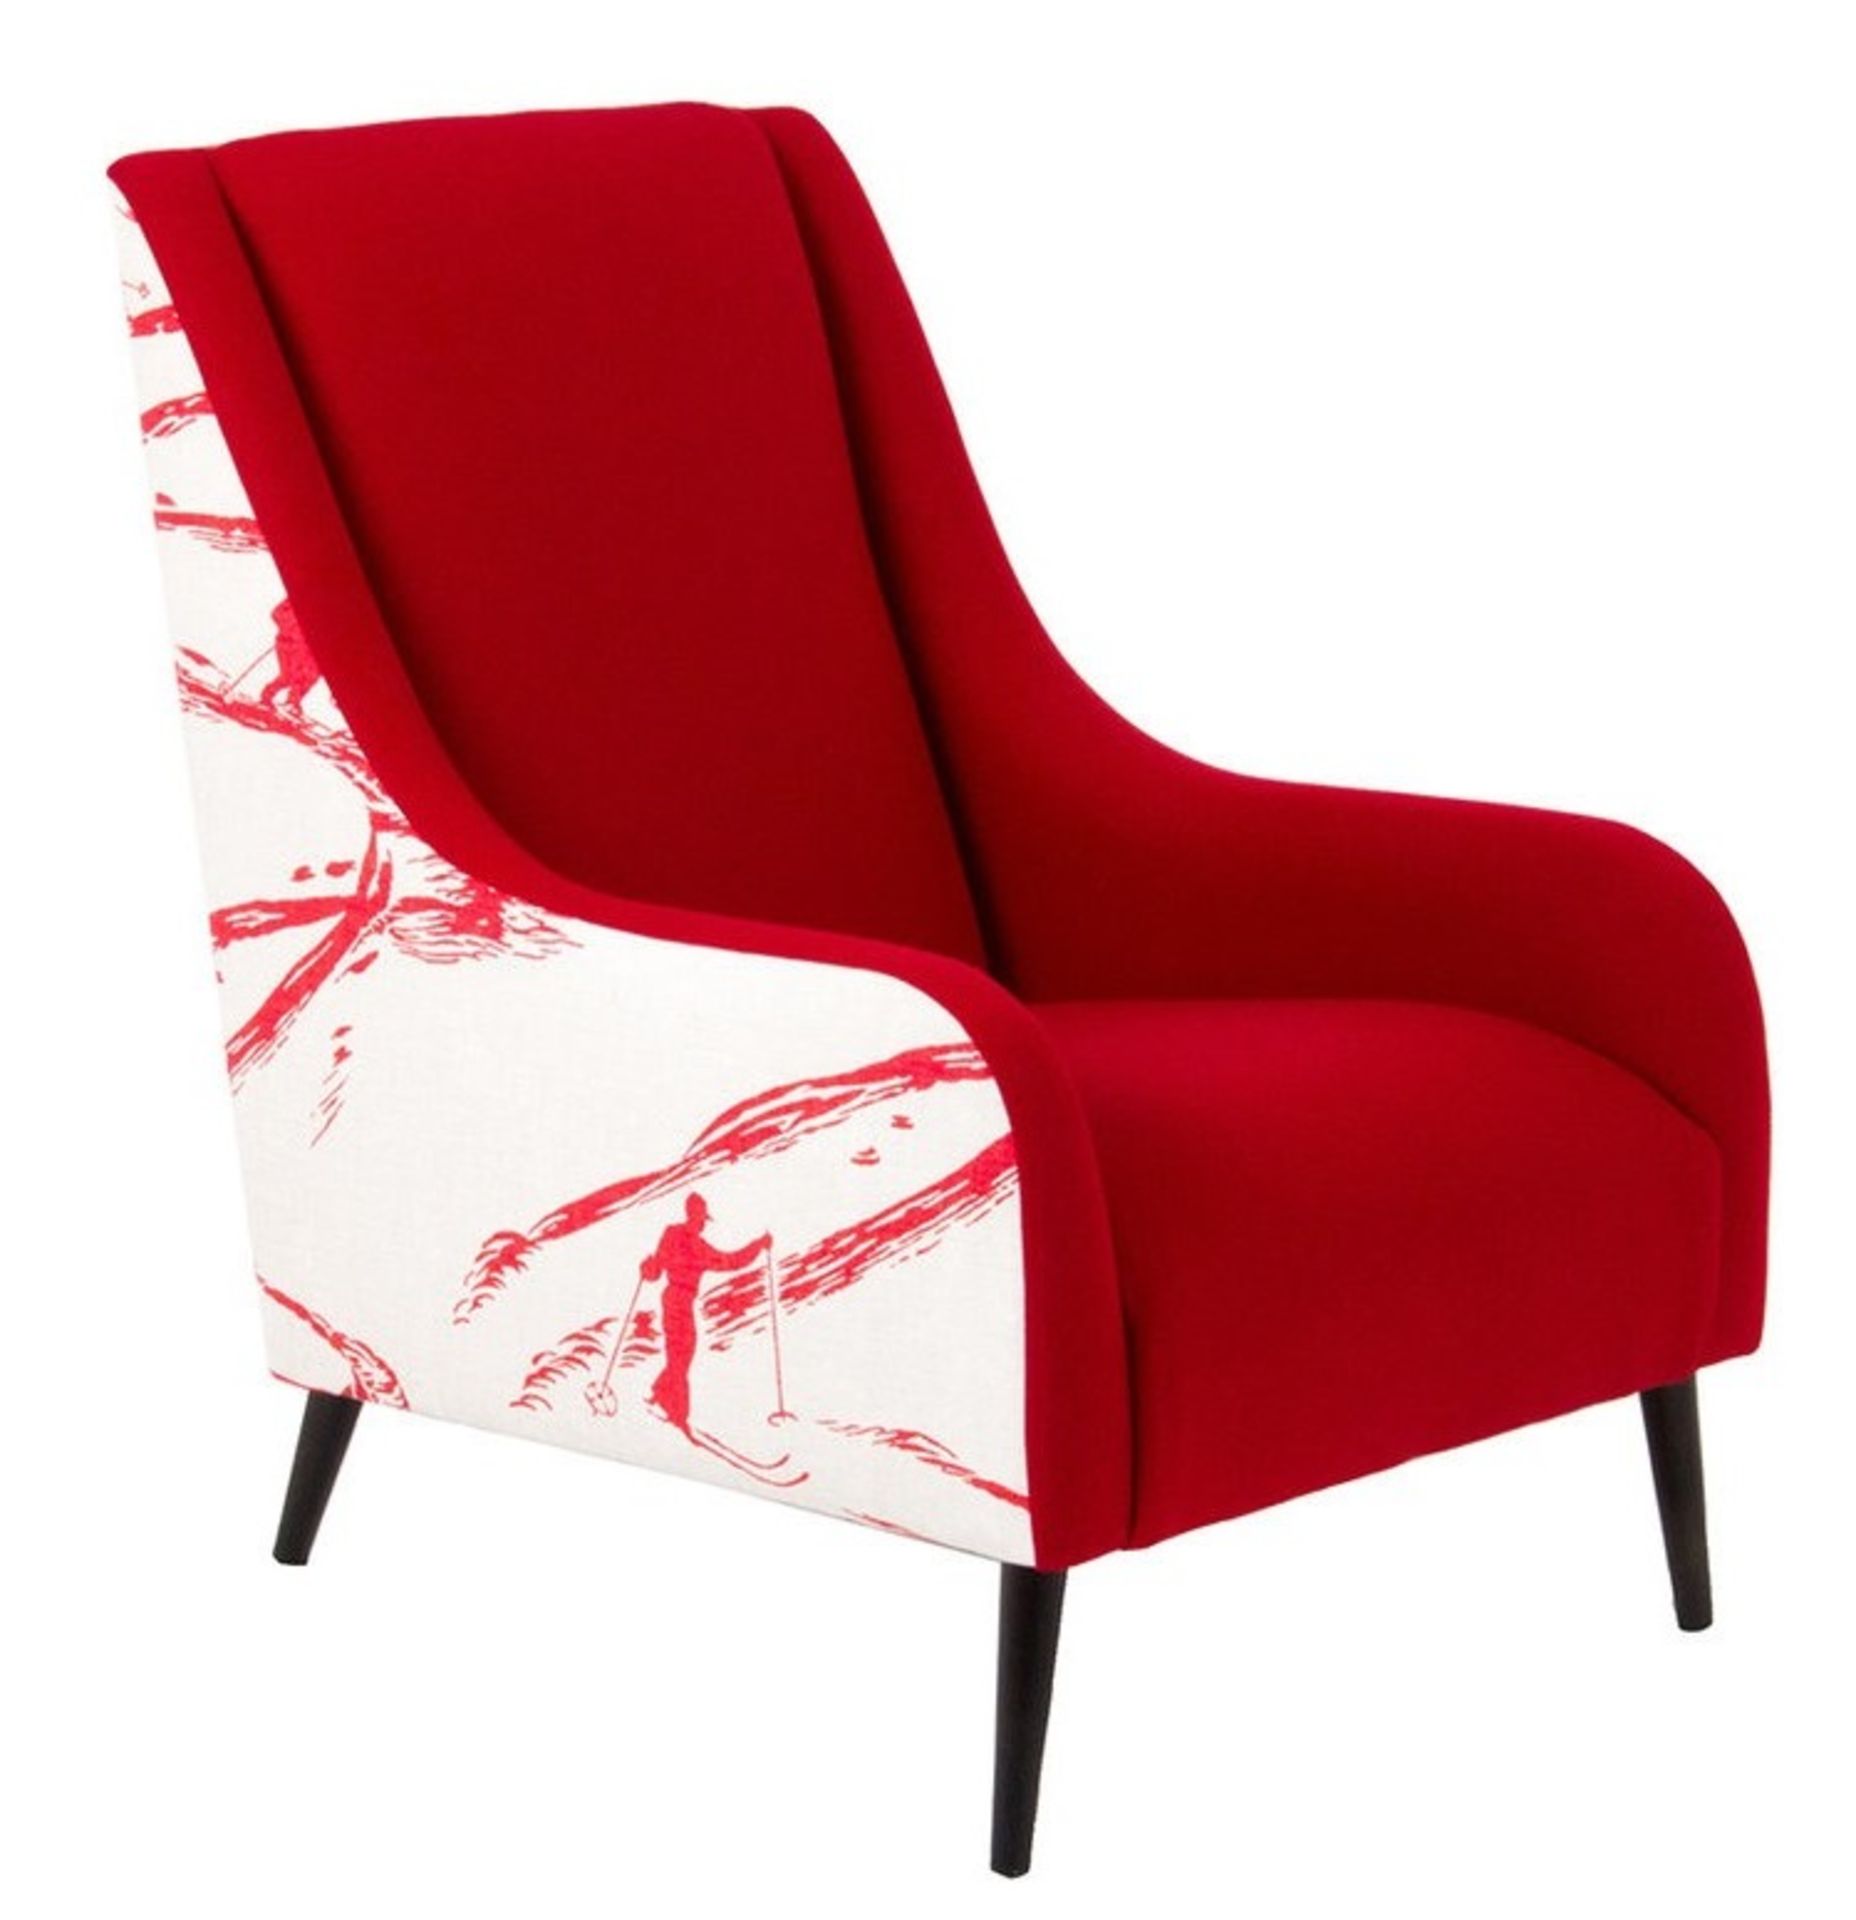 1 x Lauran Armchair Upholstered in Aviemore Skiing Fabric in Red and White - RRP £779!